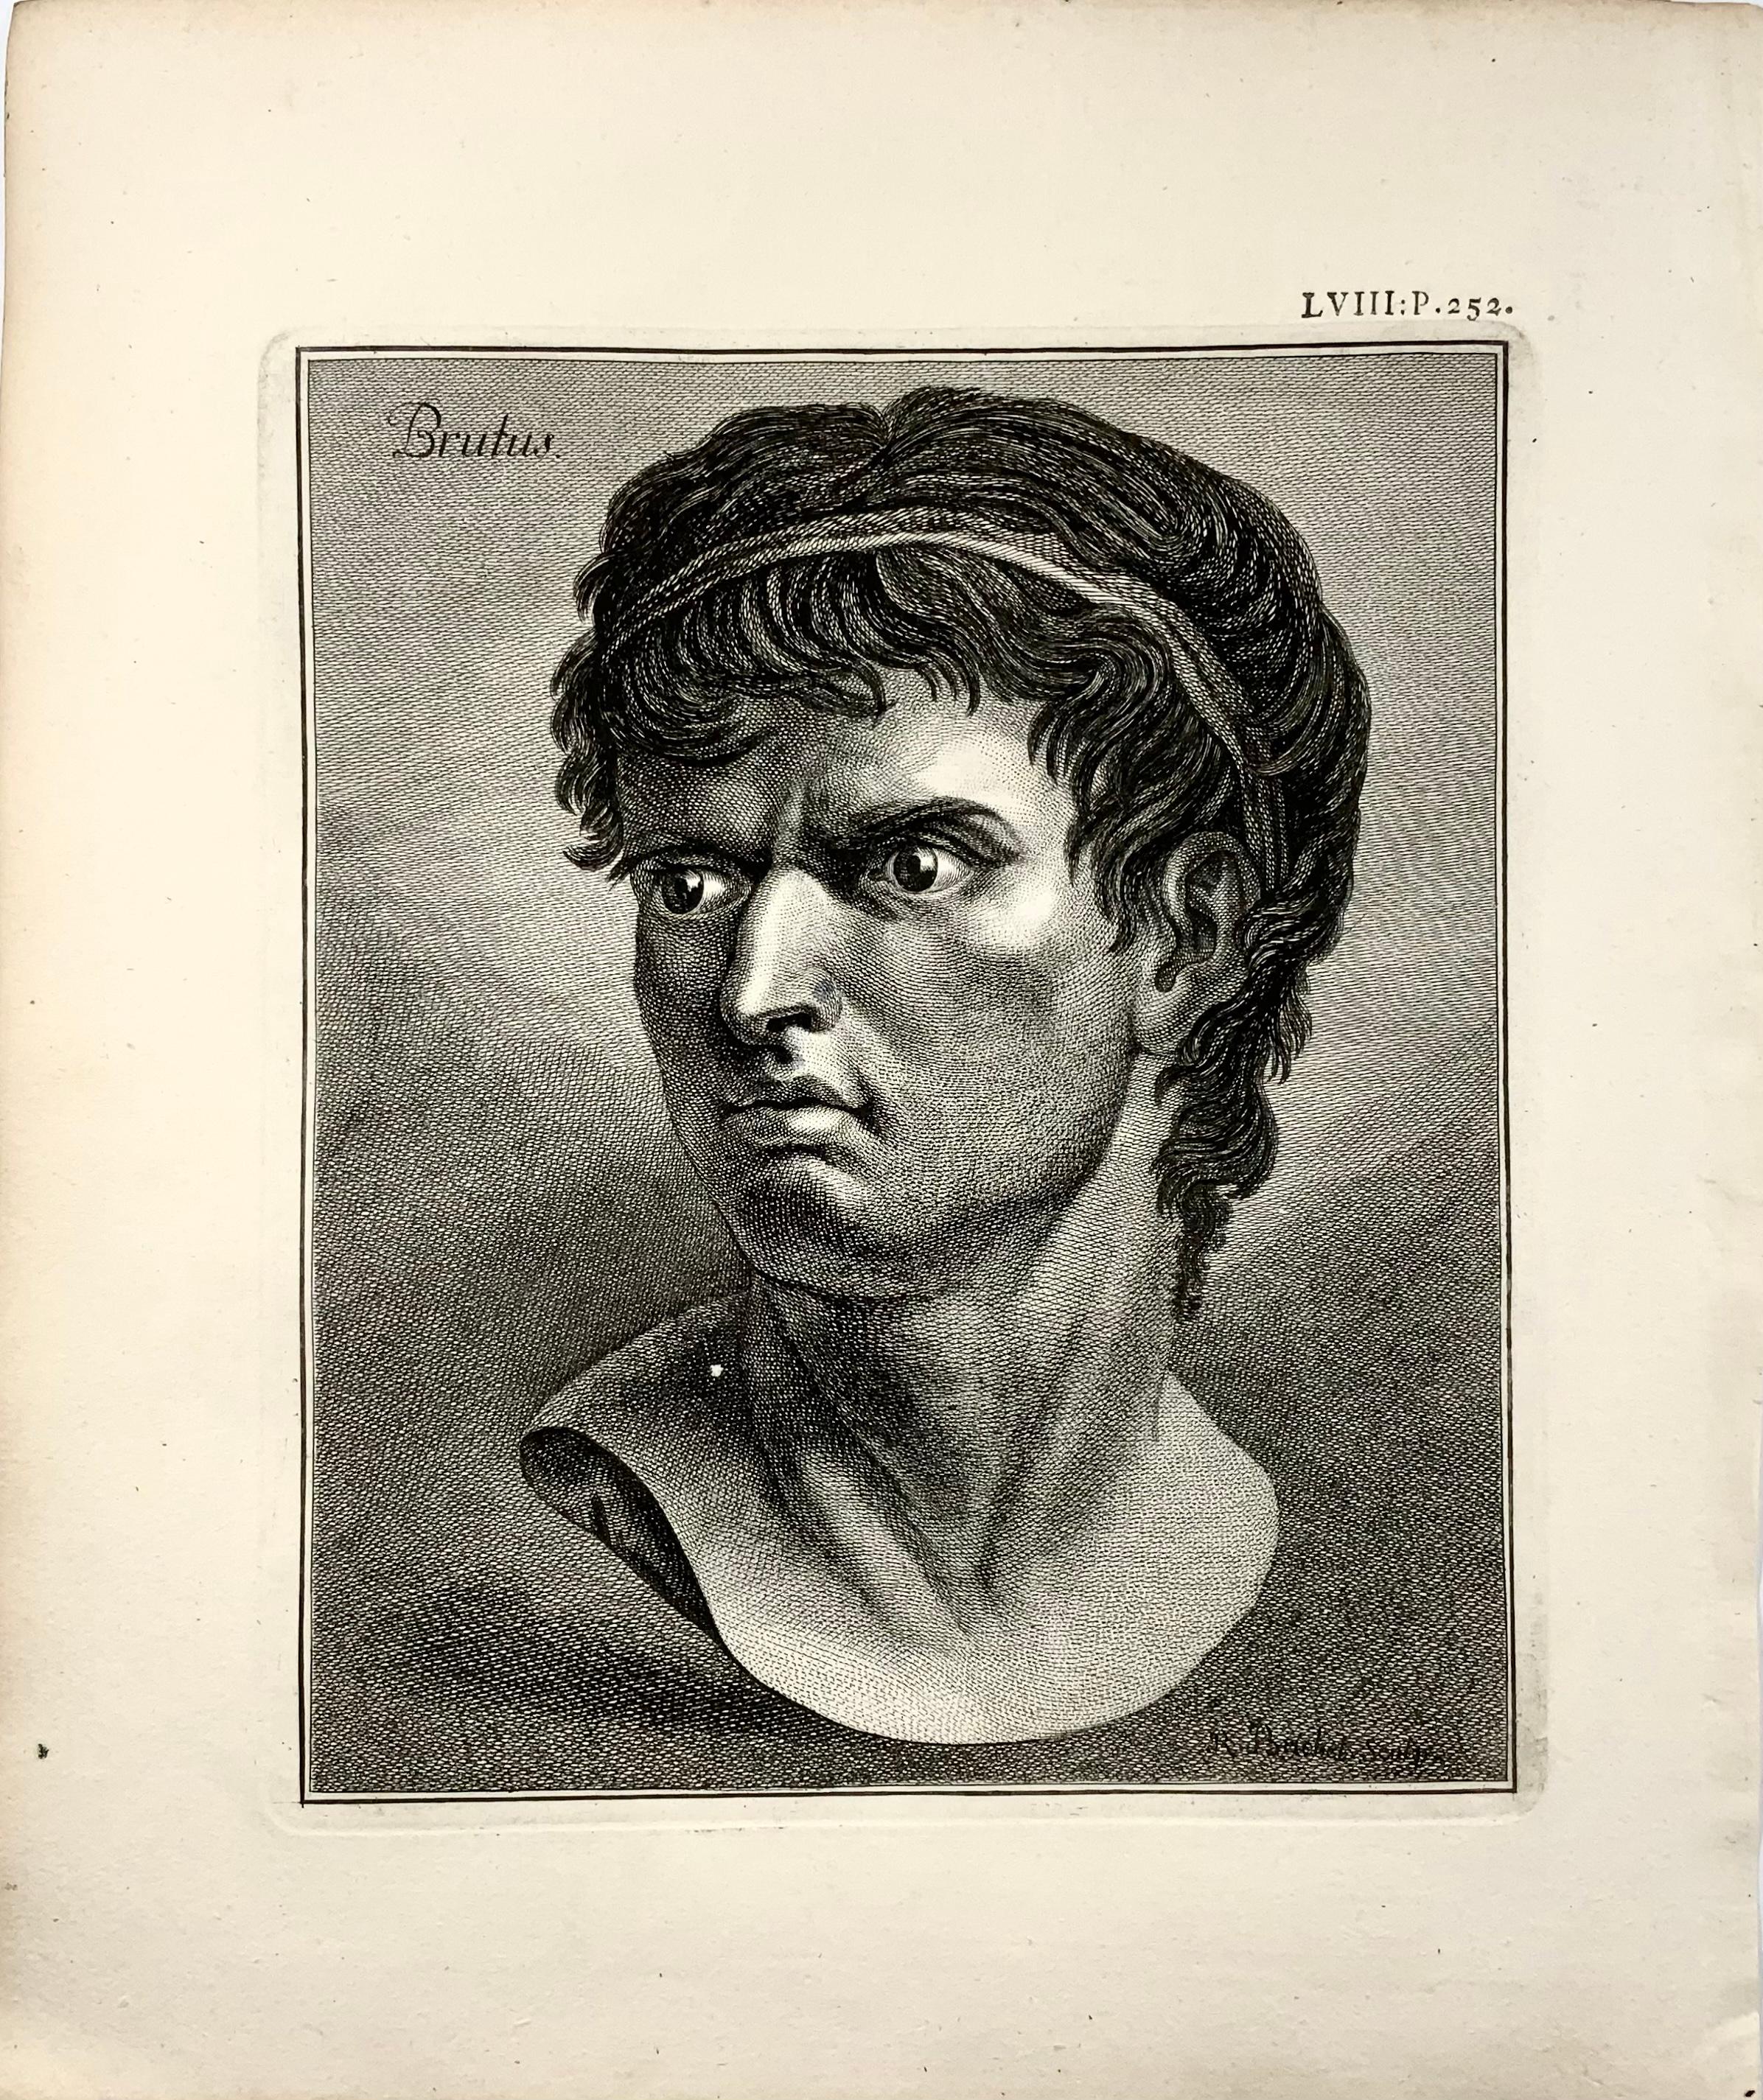 Robert Brichel

Brutus [Brutus, Marcus Iunius]

Large physiognomical study from the first issue of Lavater’s Physiognomische Fragmente.

Copper engraving.

Overall dimensions: 32.4 x 27 cm

First State. Not to be confused with the later